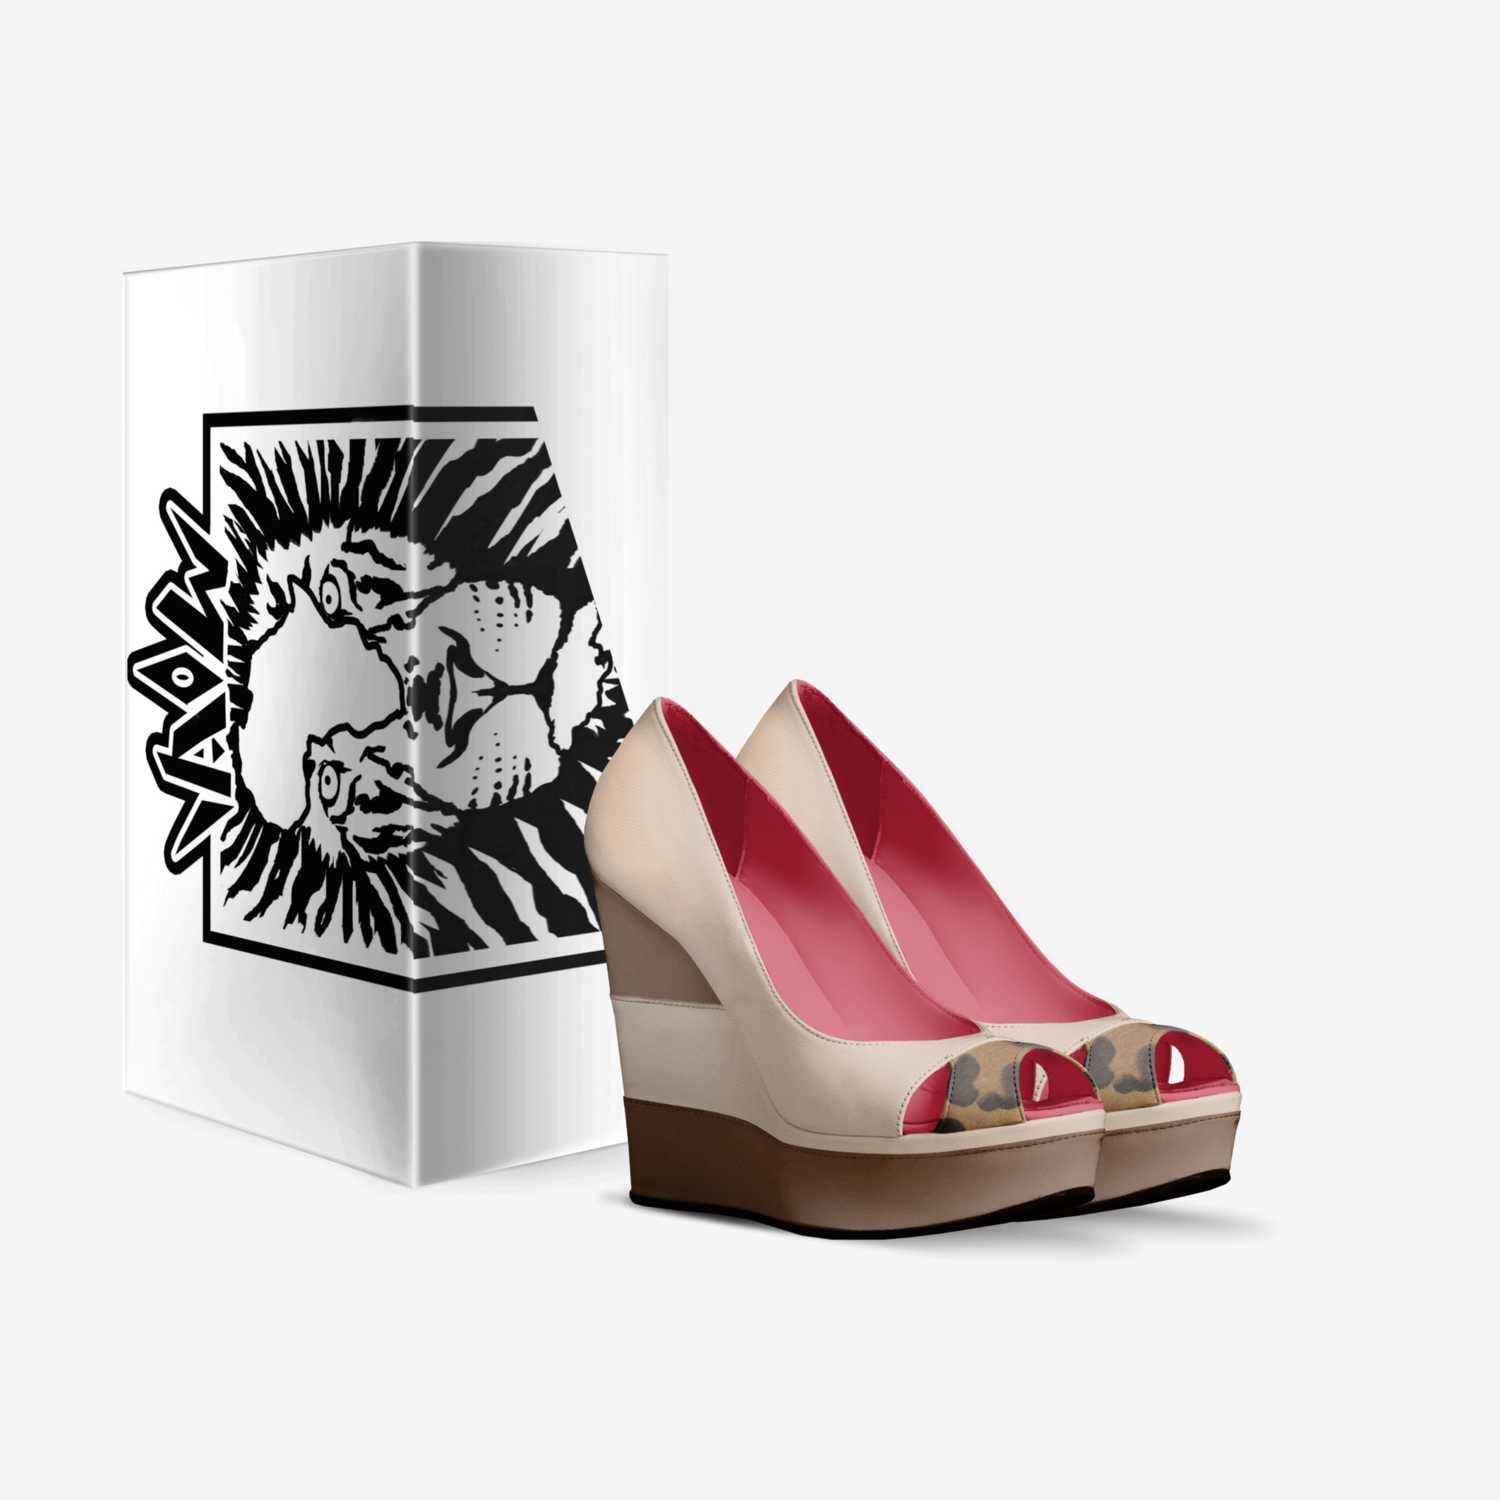 Khaleesi custom made in Italy shoes by Adrian Willis | Box view